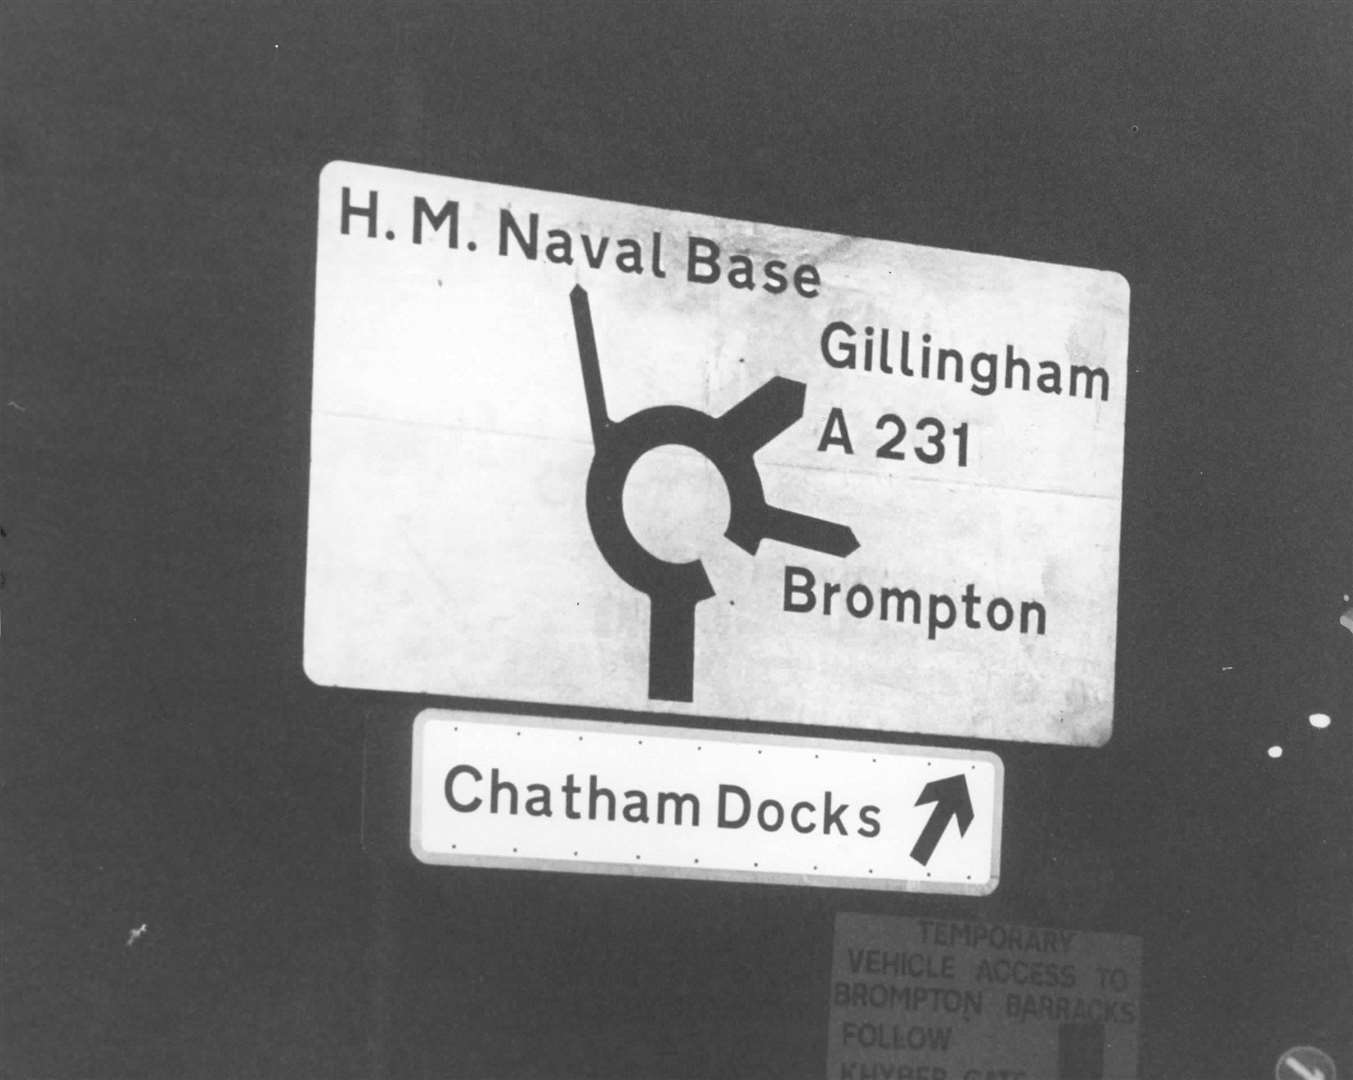 The road signs pointing to the Navy base at Chatham - which closed in 1984